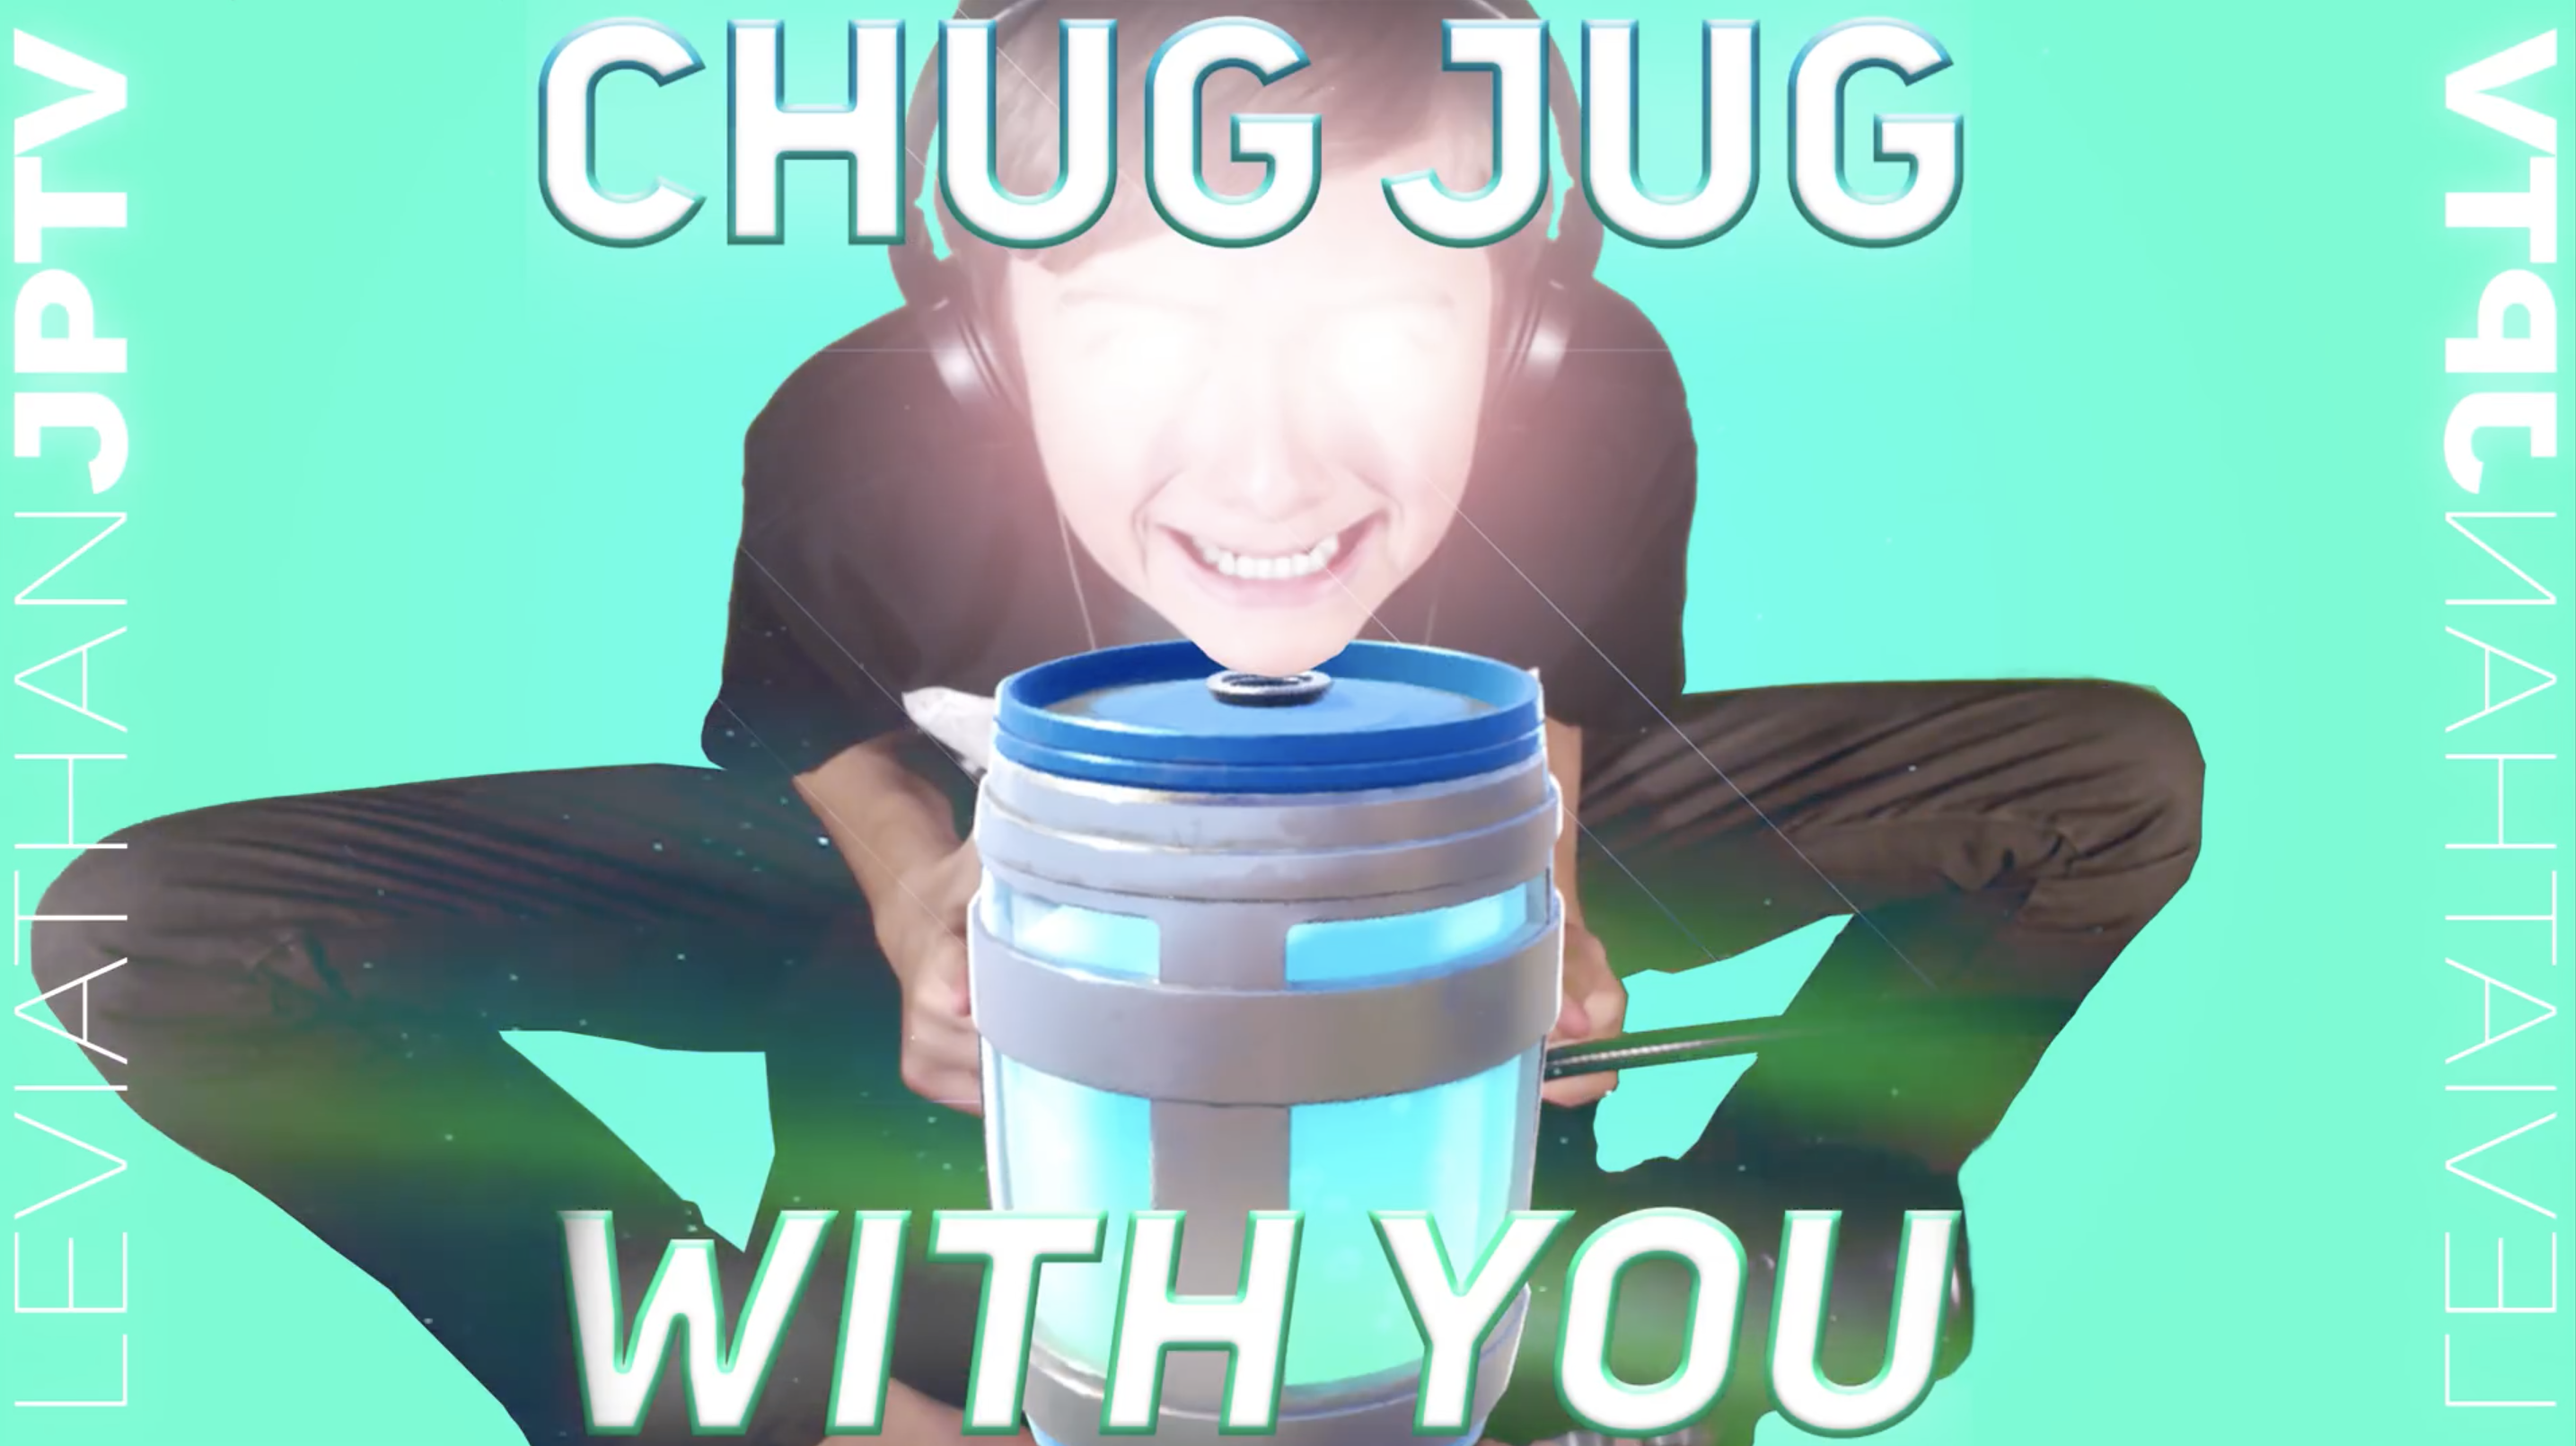 It’s a young boy with ridiculous glowing eyes, sitting over a giant container of chug jug. 